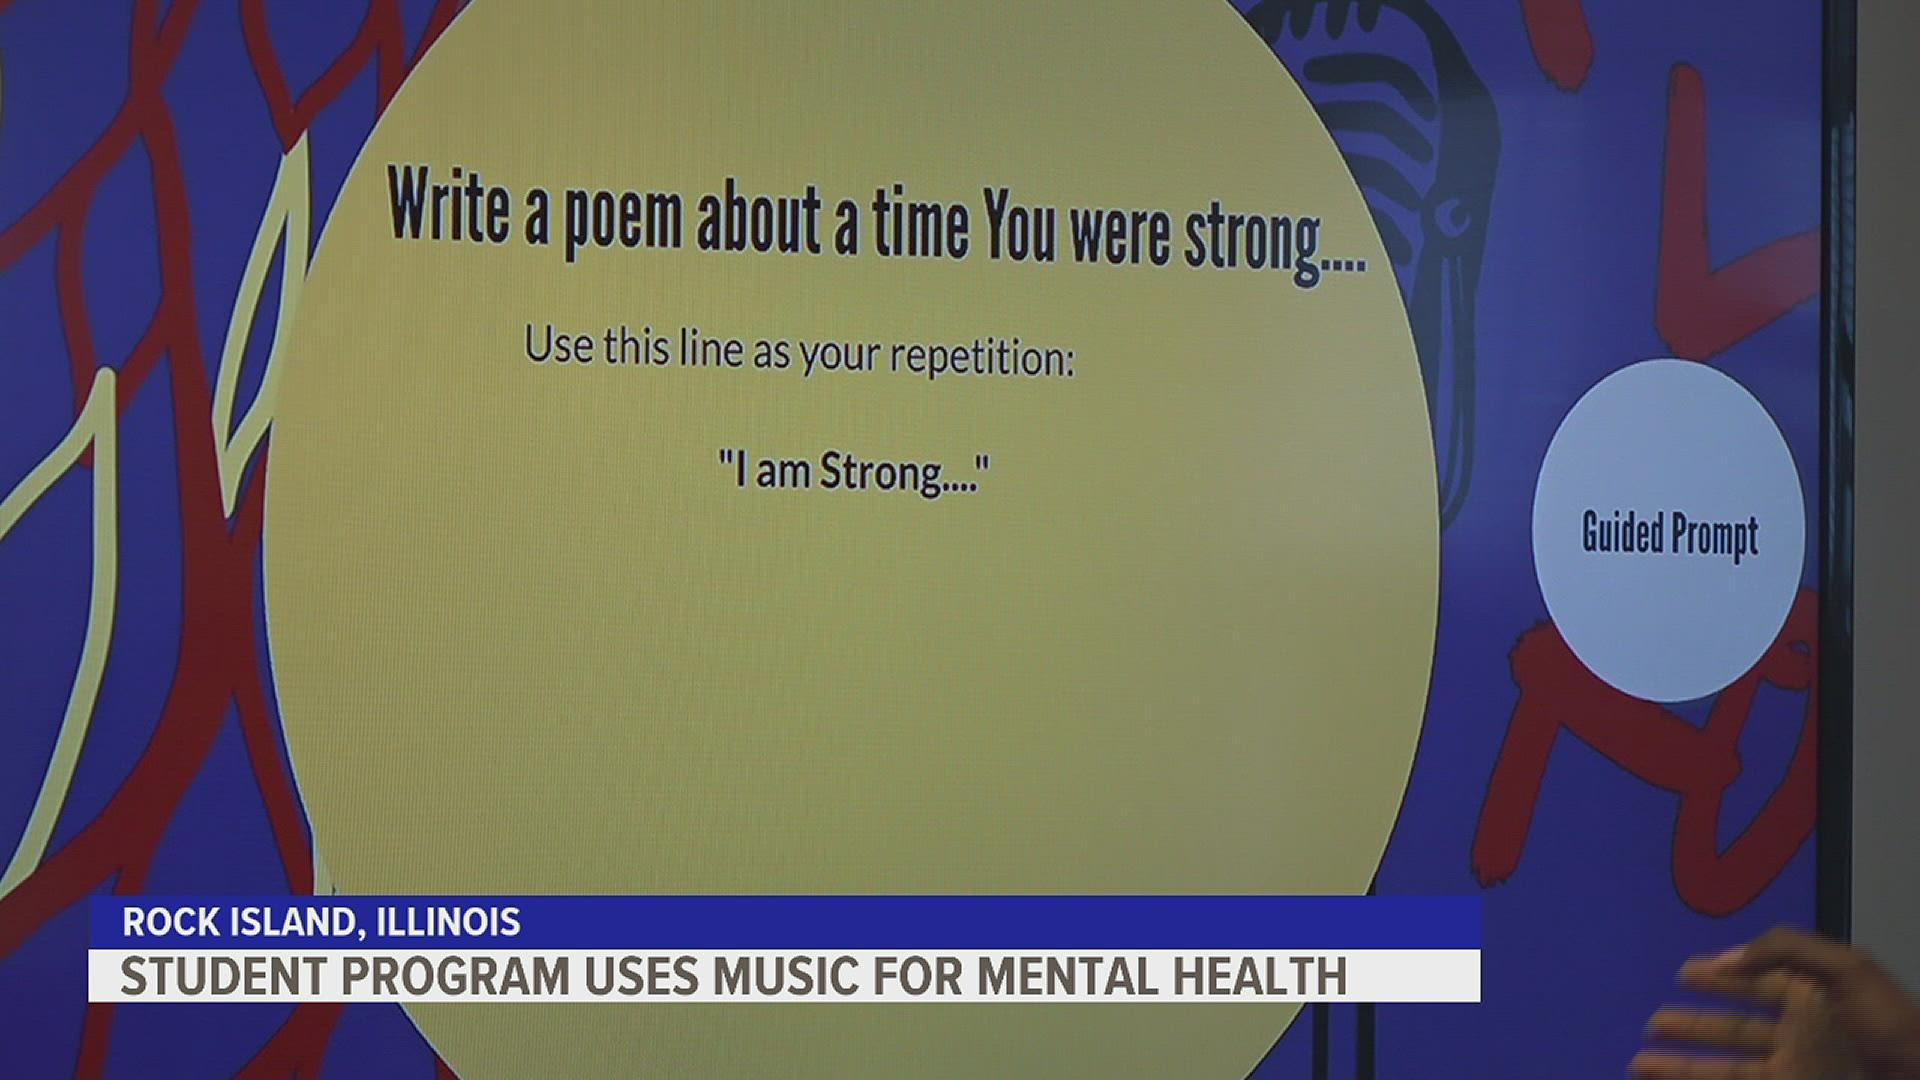 The Young Lions Roar program is the first of its kind in Rock Island, helping kids with their mental health through poetry, rap and other music.